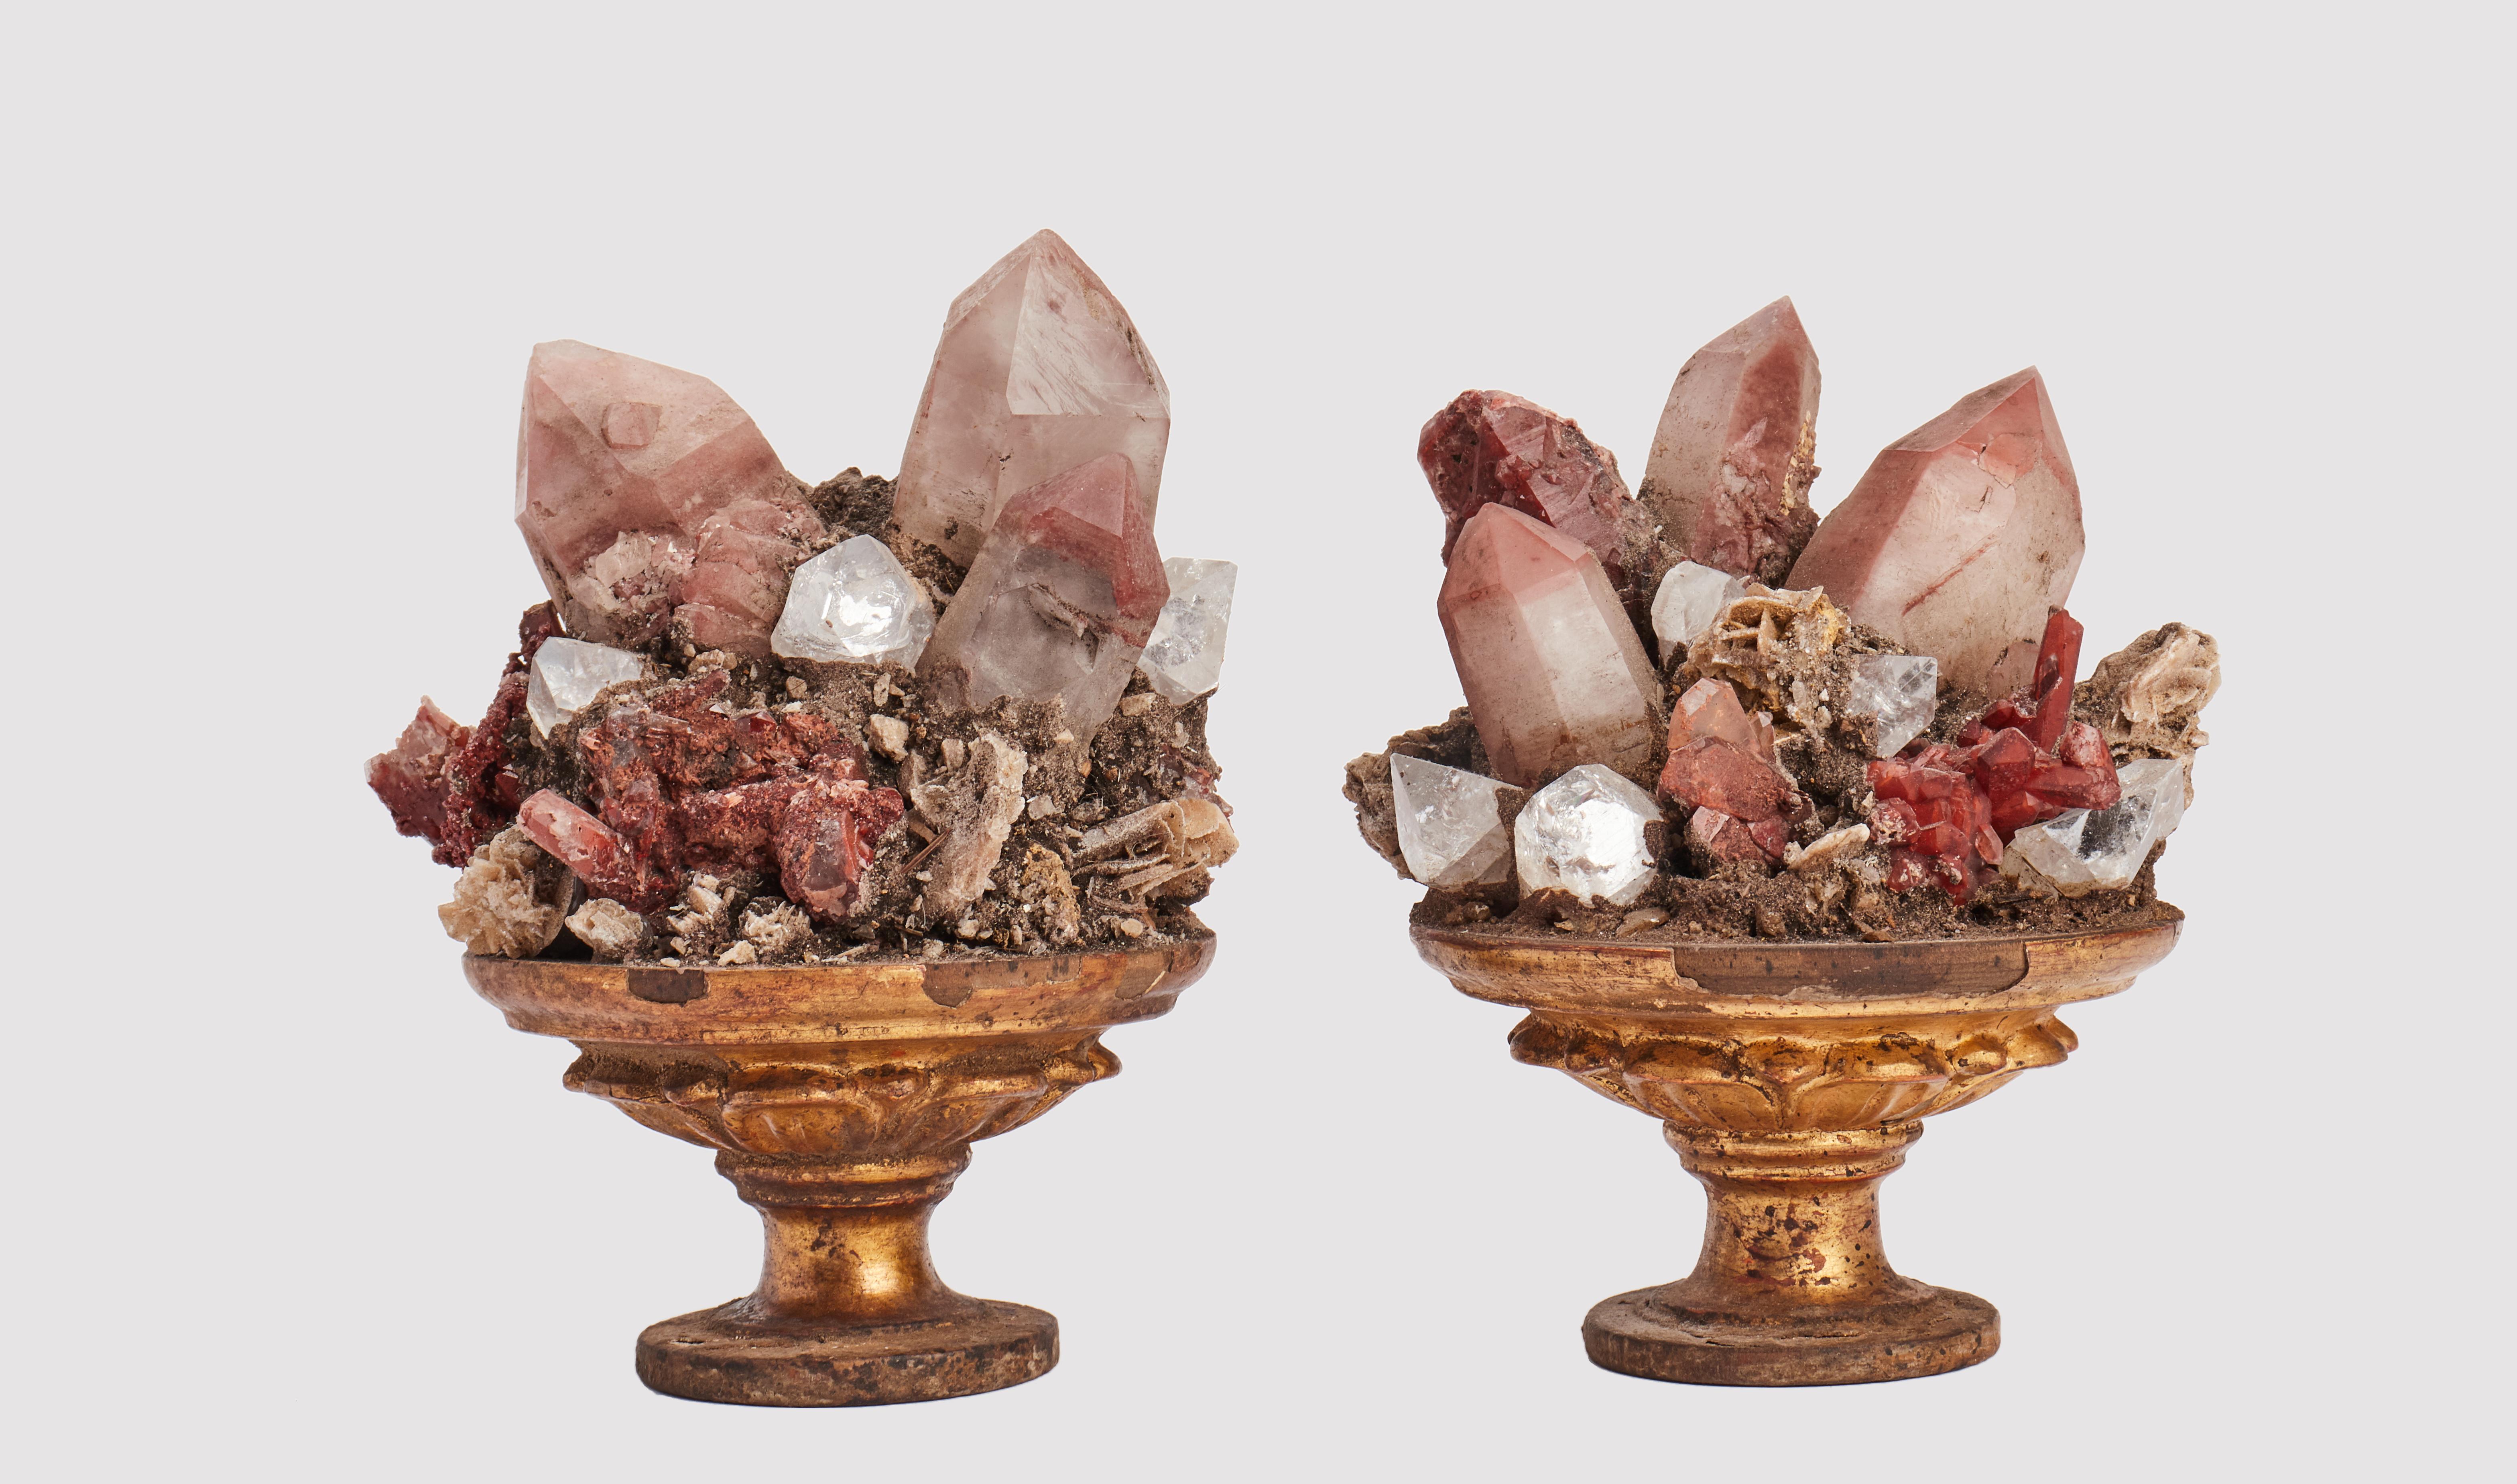 A Naturalia mineral specimen. A pair of red quartz, rock crystals and Apophilite druzes, mounted over a guild-plated wooden bases with leaves decoration on a shape of a vase. Italy last part of 19th century.